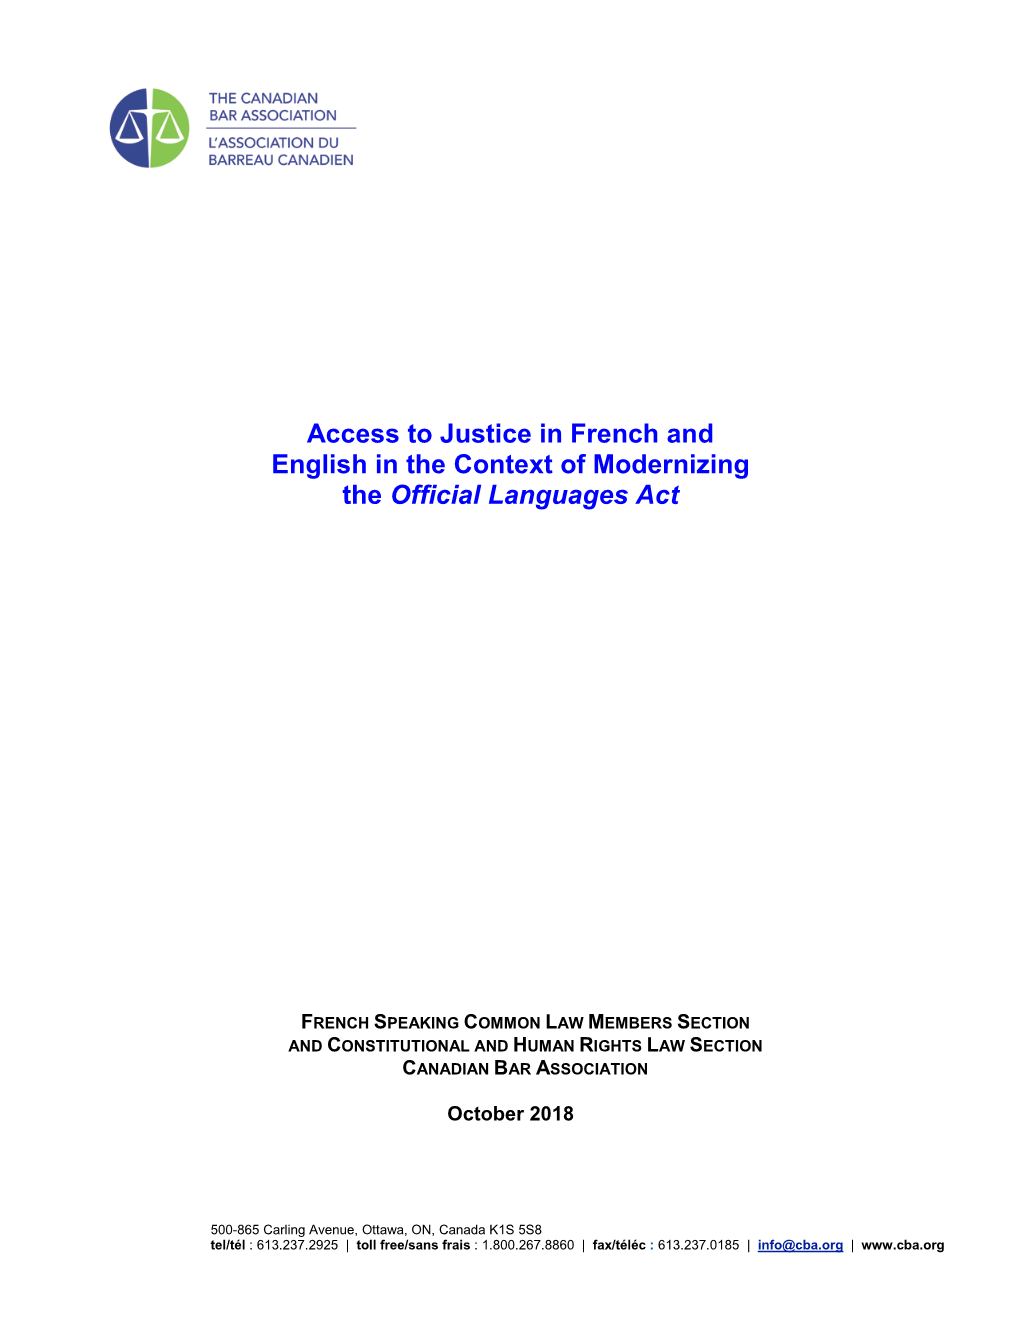 Access to Justice in French and English in the Context of Modernizing the Official Languages Act